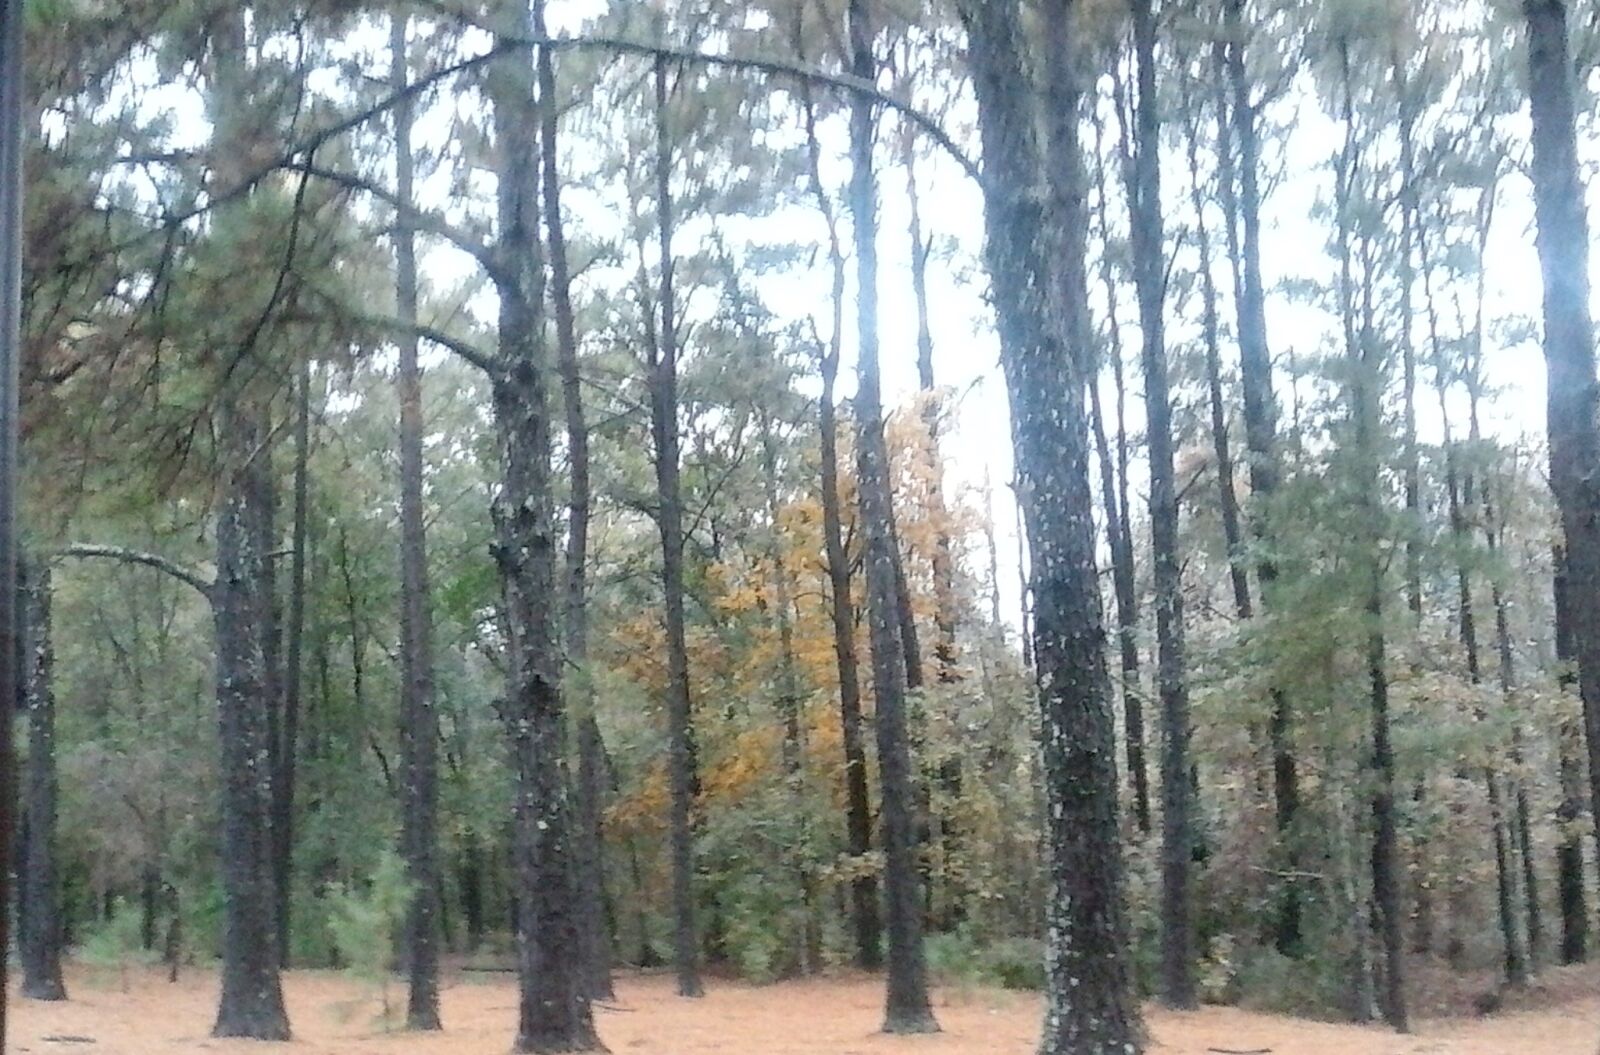 LG Optimus Fuel sample photo. Country, forest, photo, pine photography